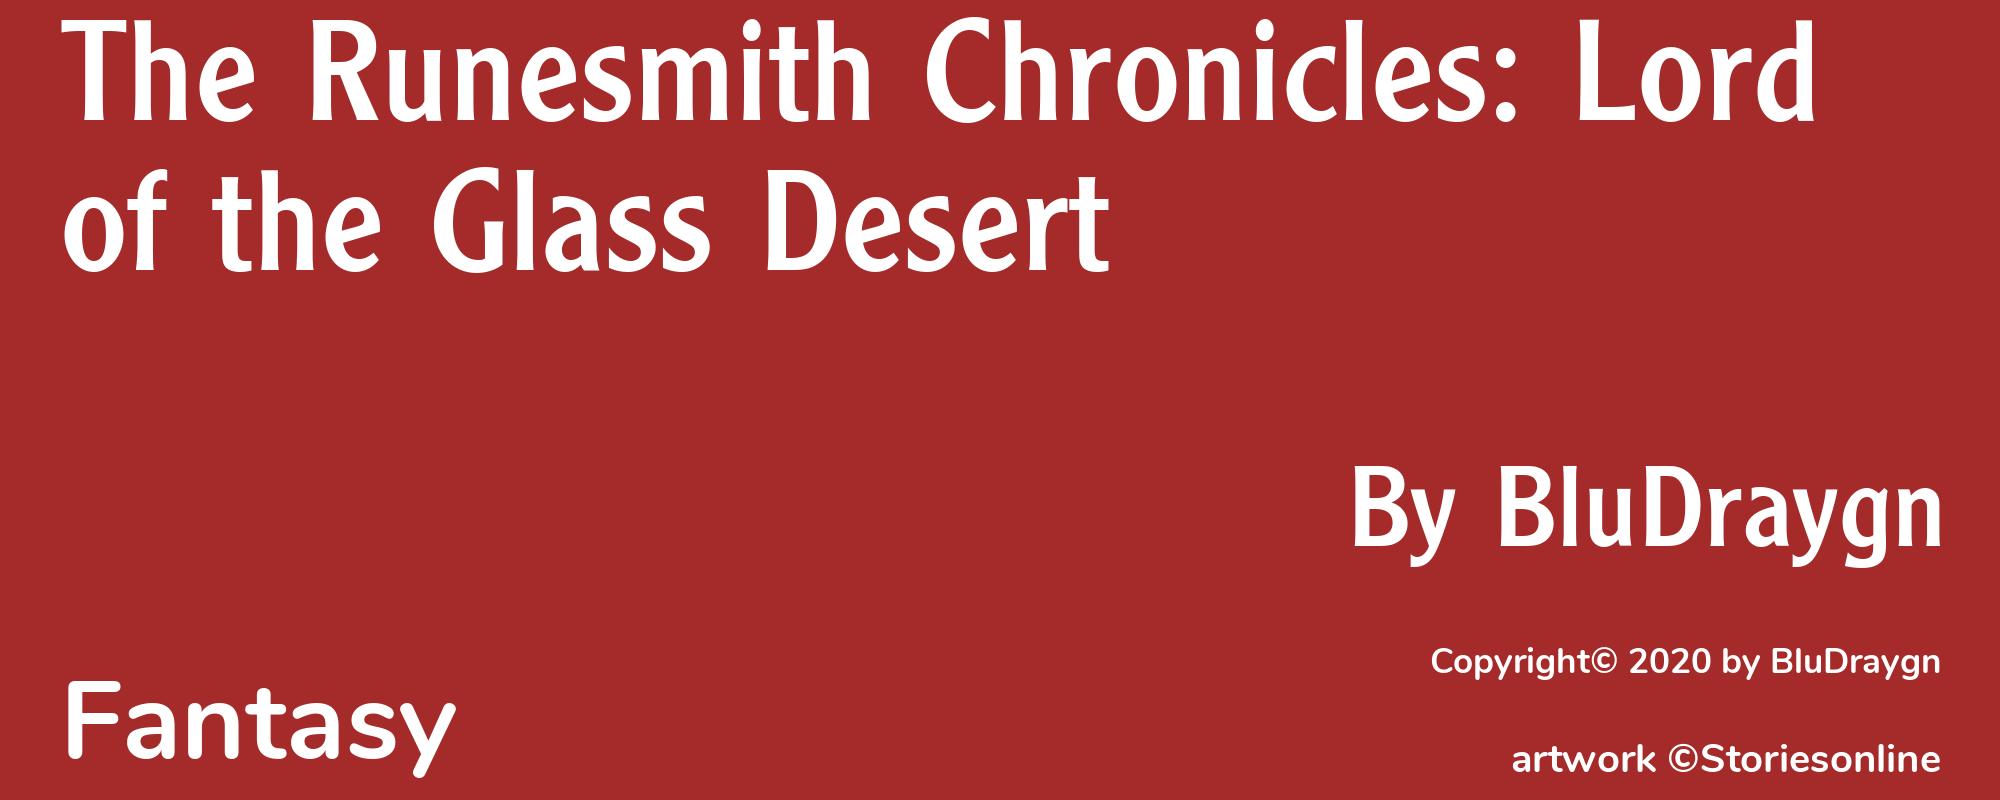 The Runesmith Chronicles: Lord of the Glass Desert - Cover